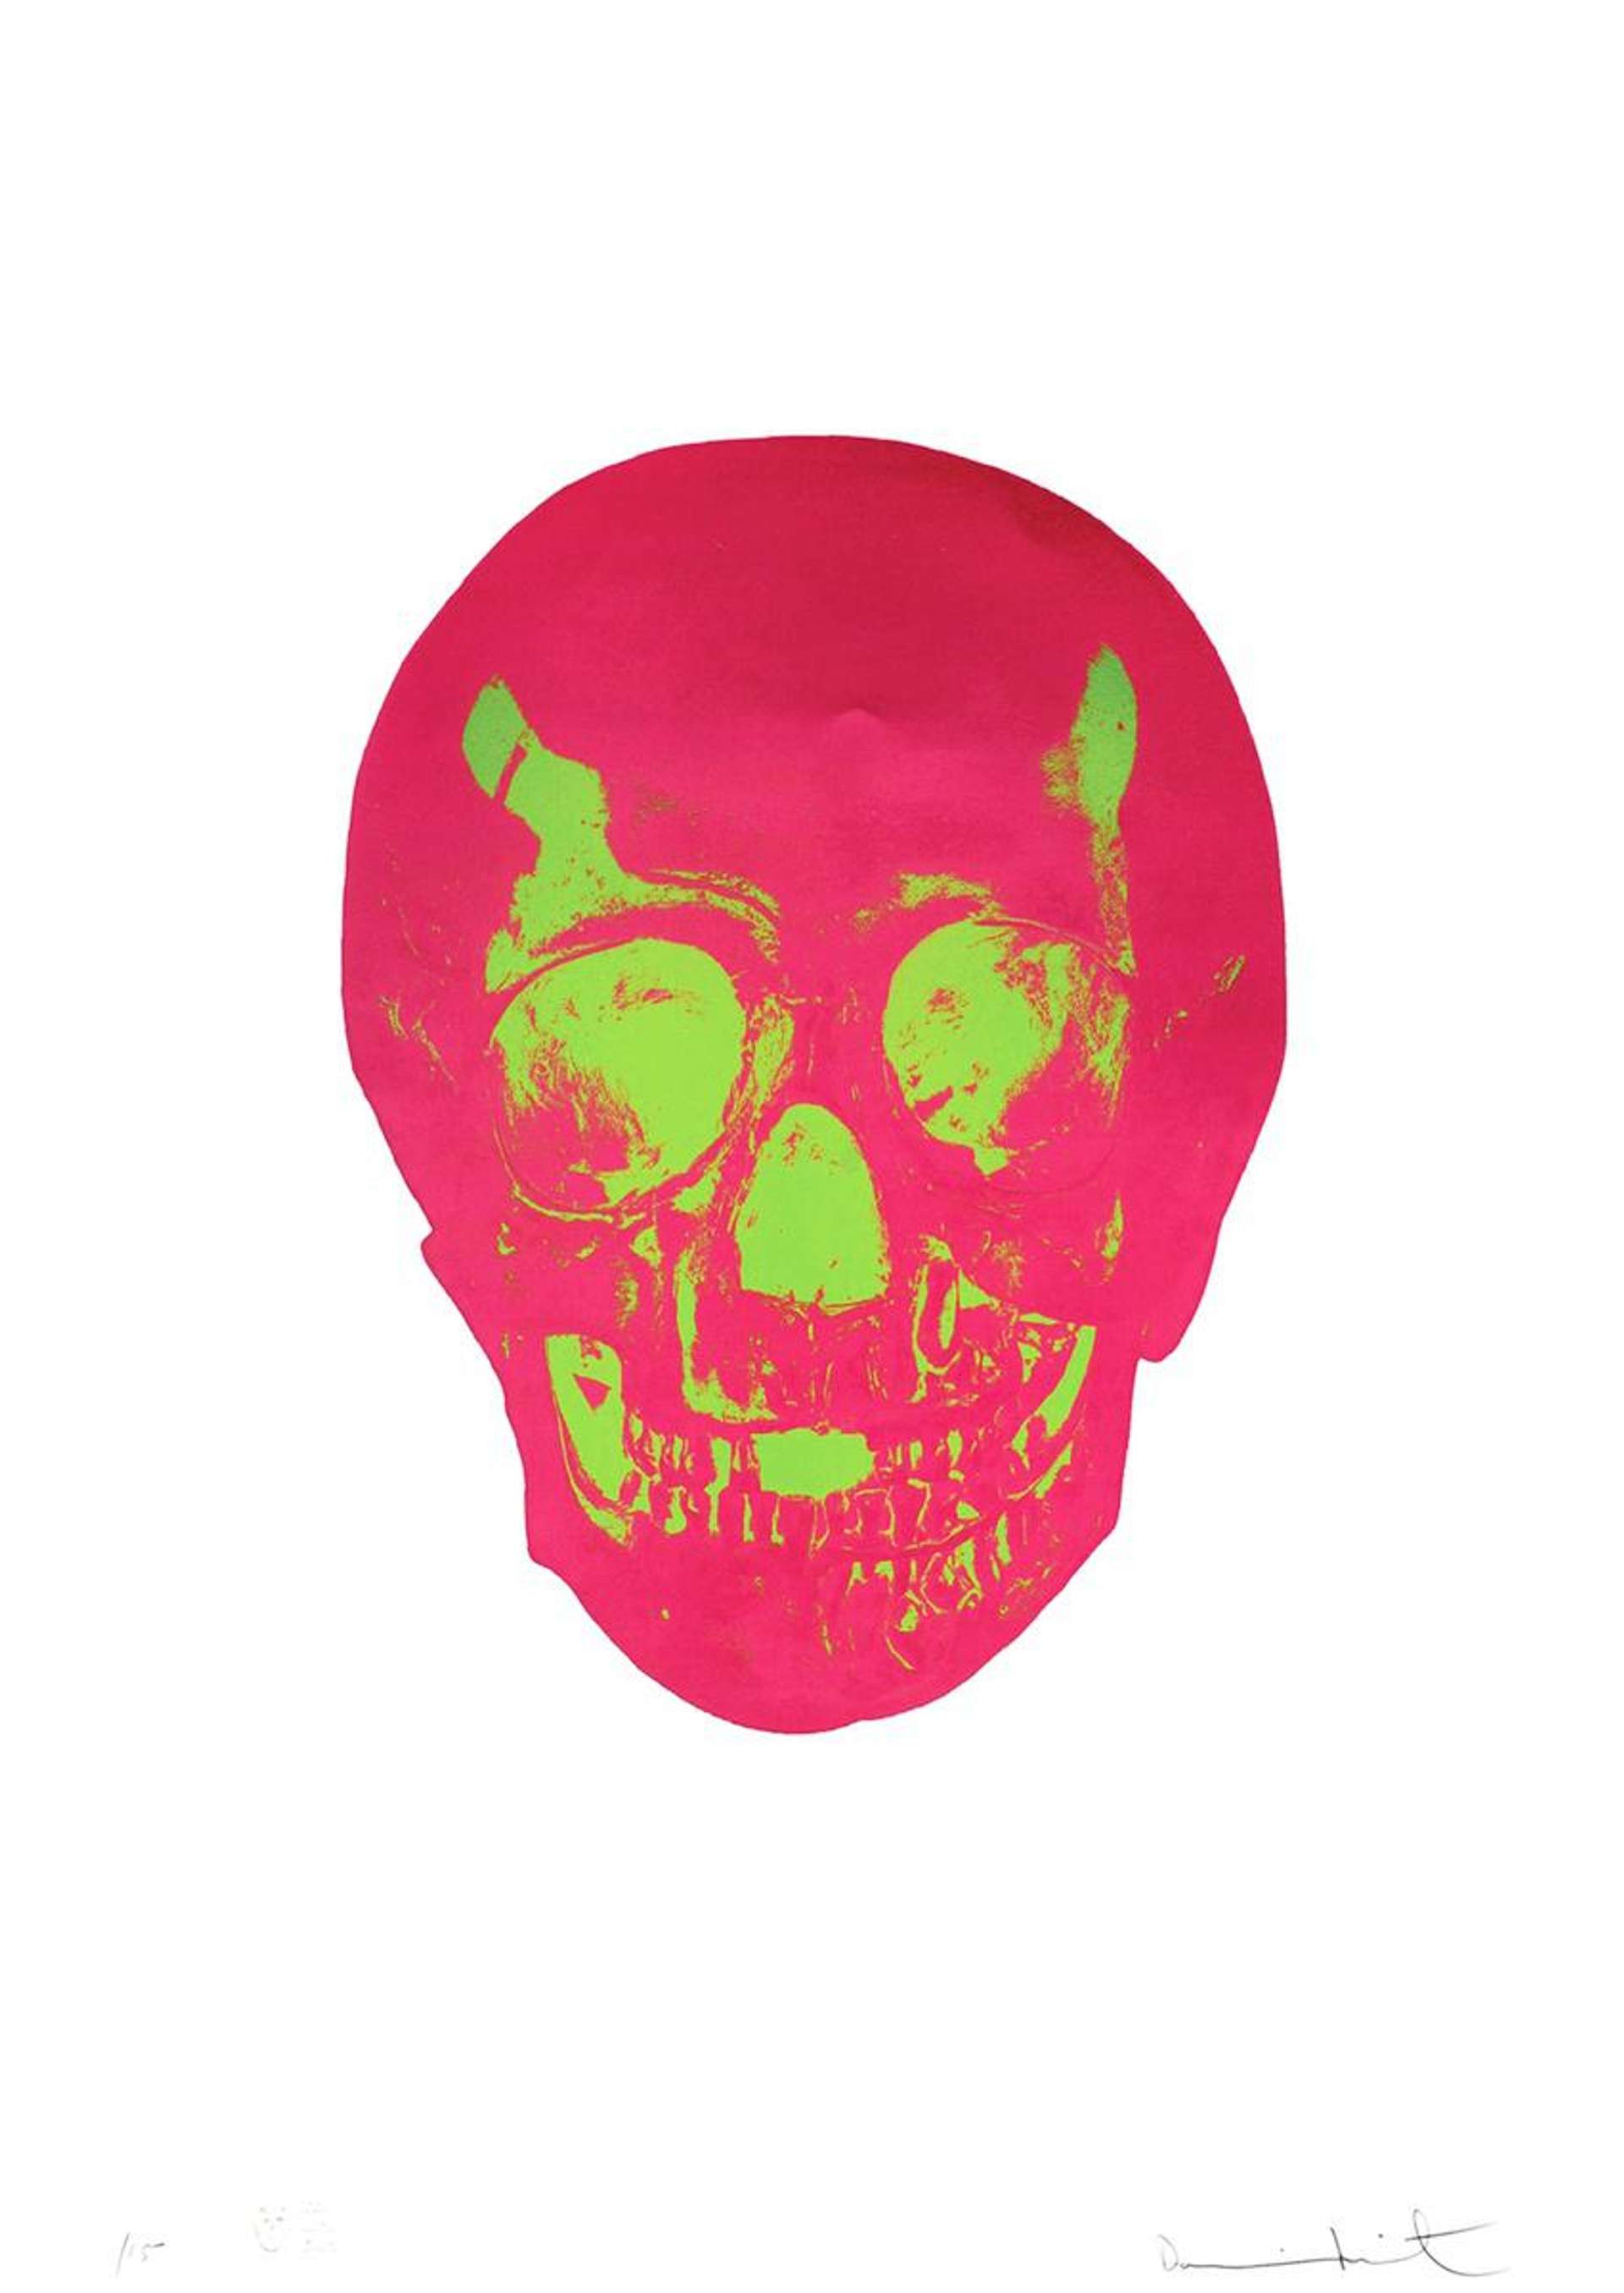 The Dead (Loganberry Pink, Lime Green) by Damien Hirst 